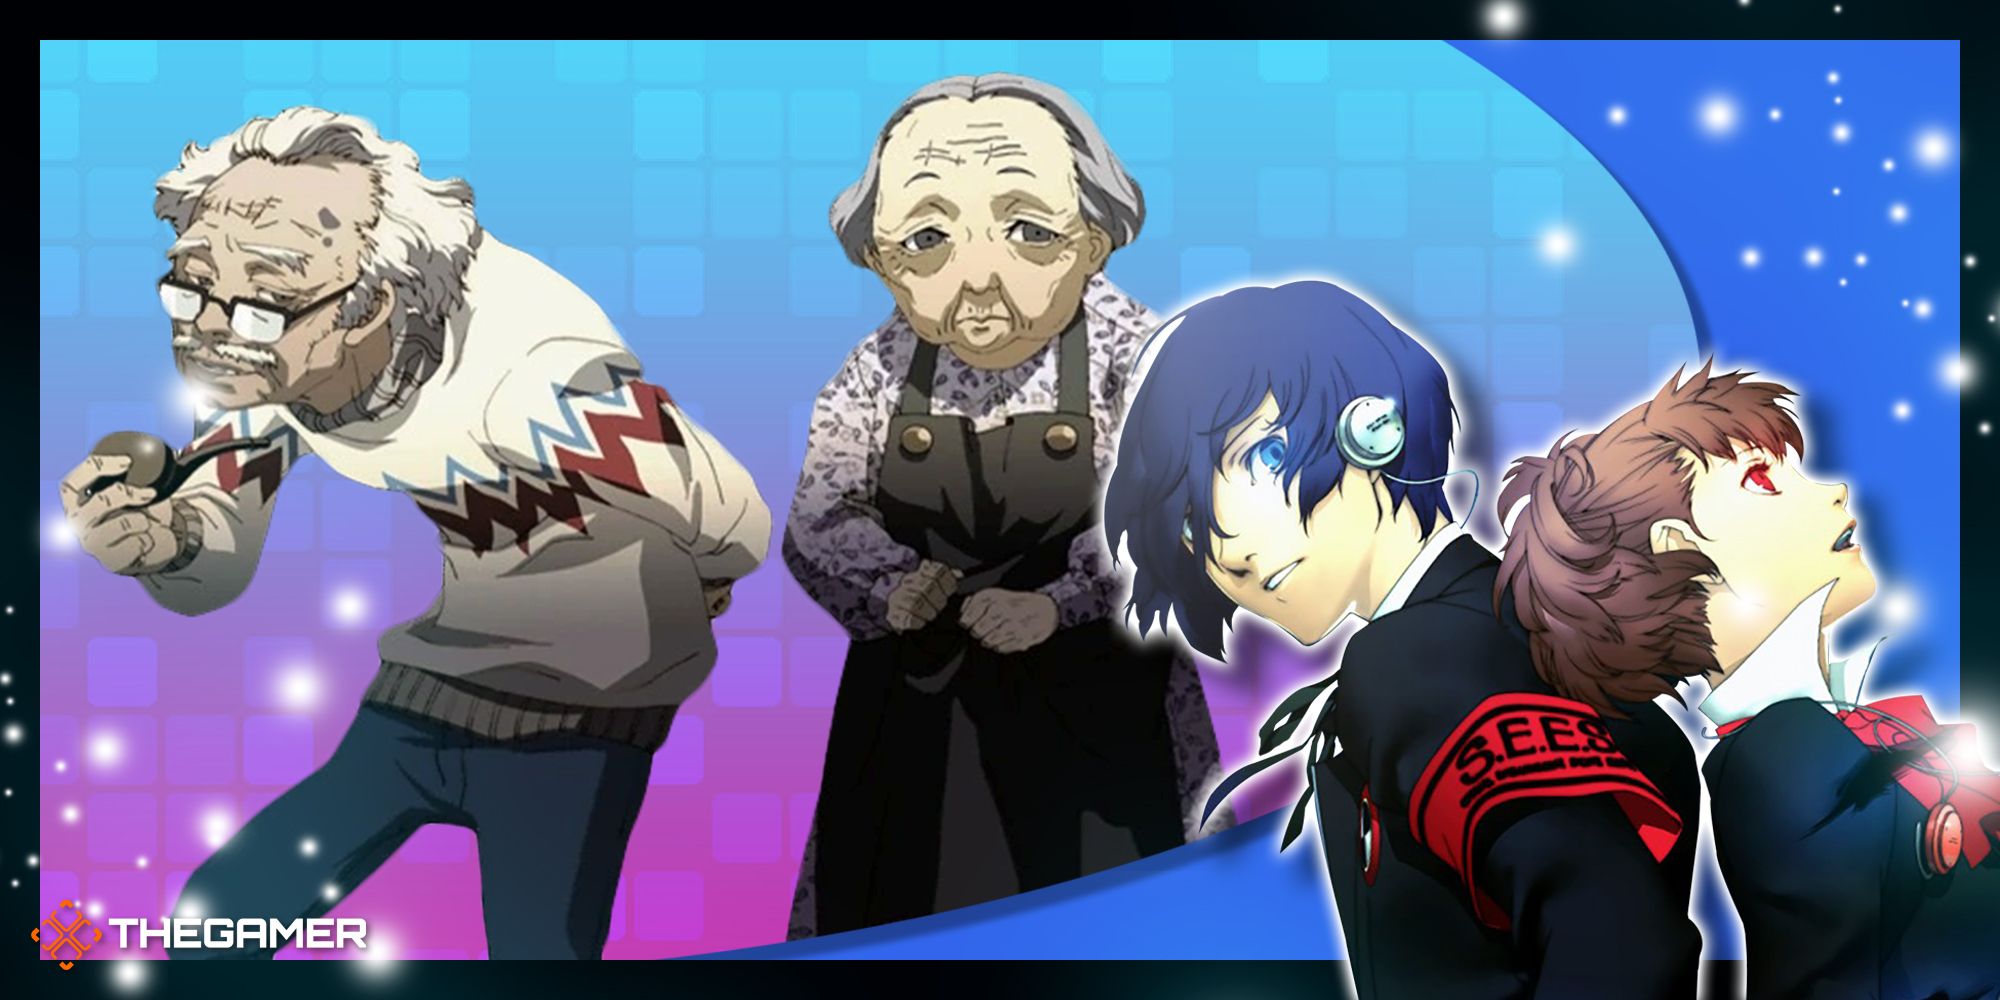 bunkichi and mitsuko, the old couple in persona 3 portable who serve as the hierophant arcana